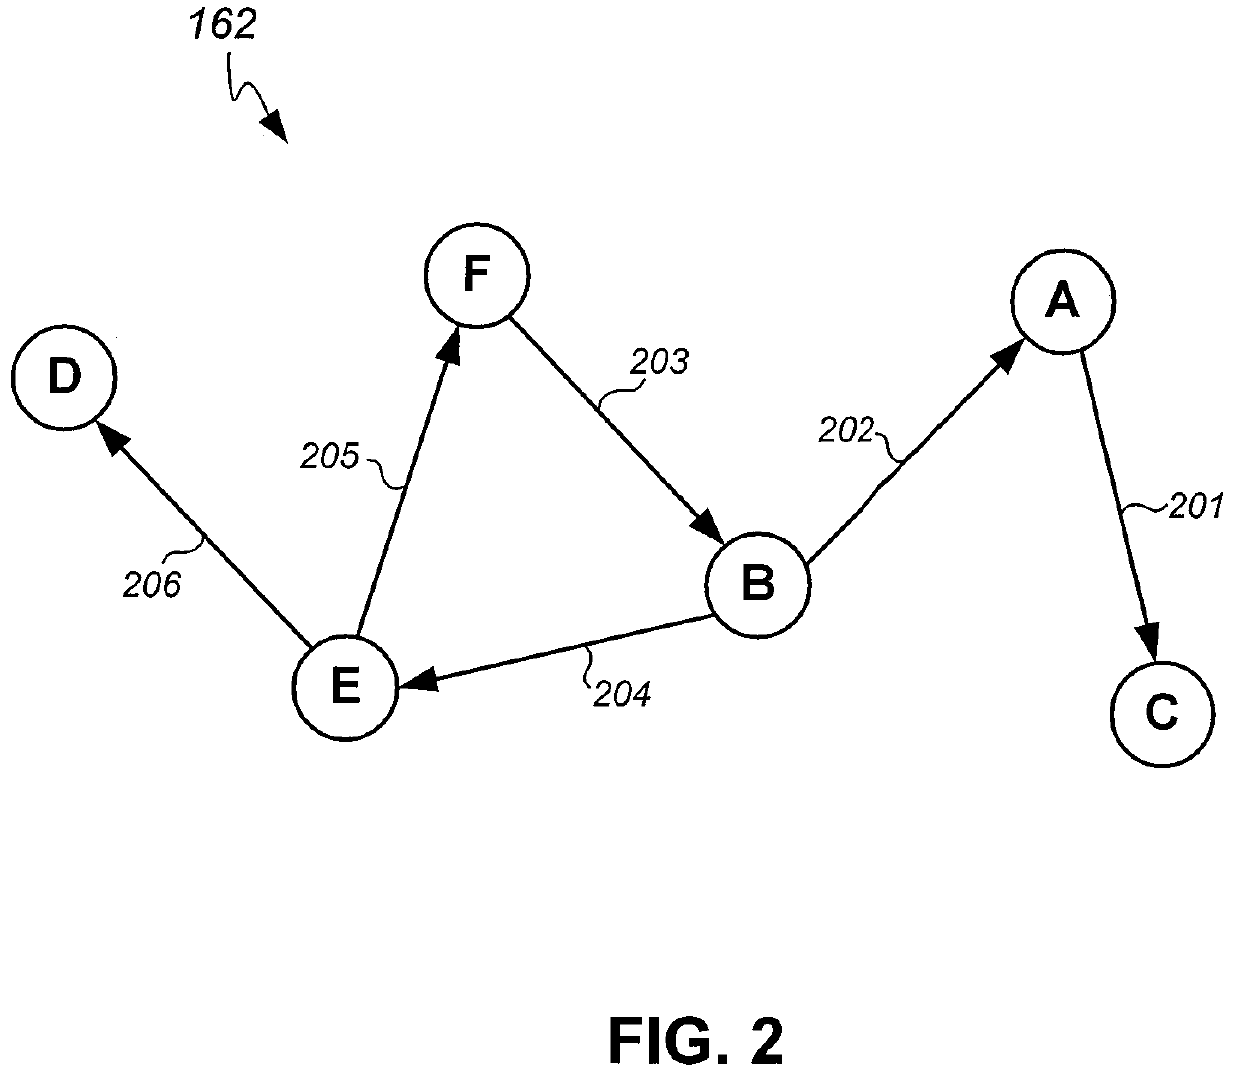 Methods and system for combating cyber threats using a related object sequence hash